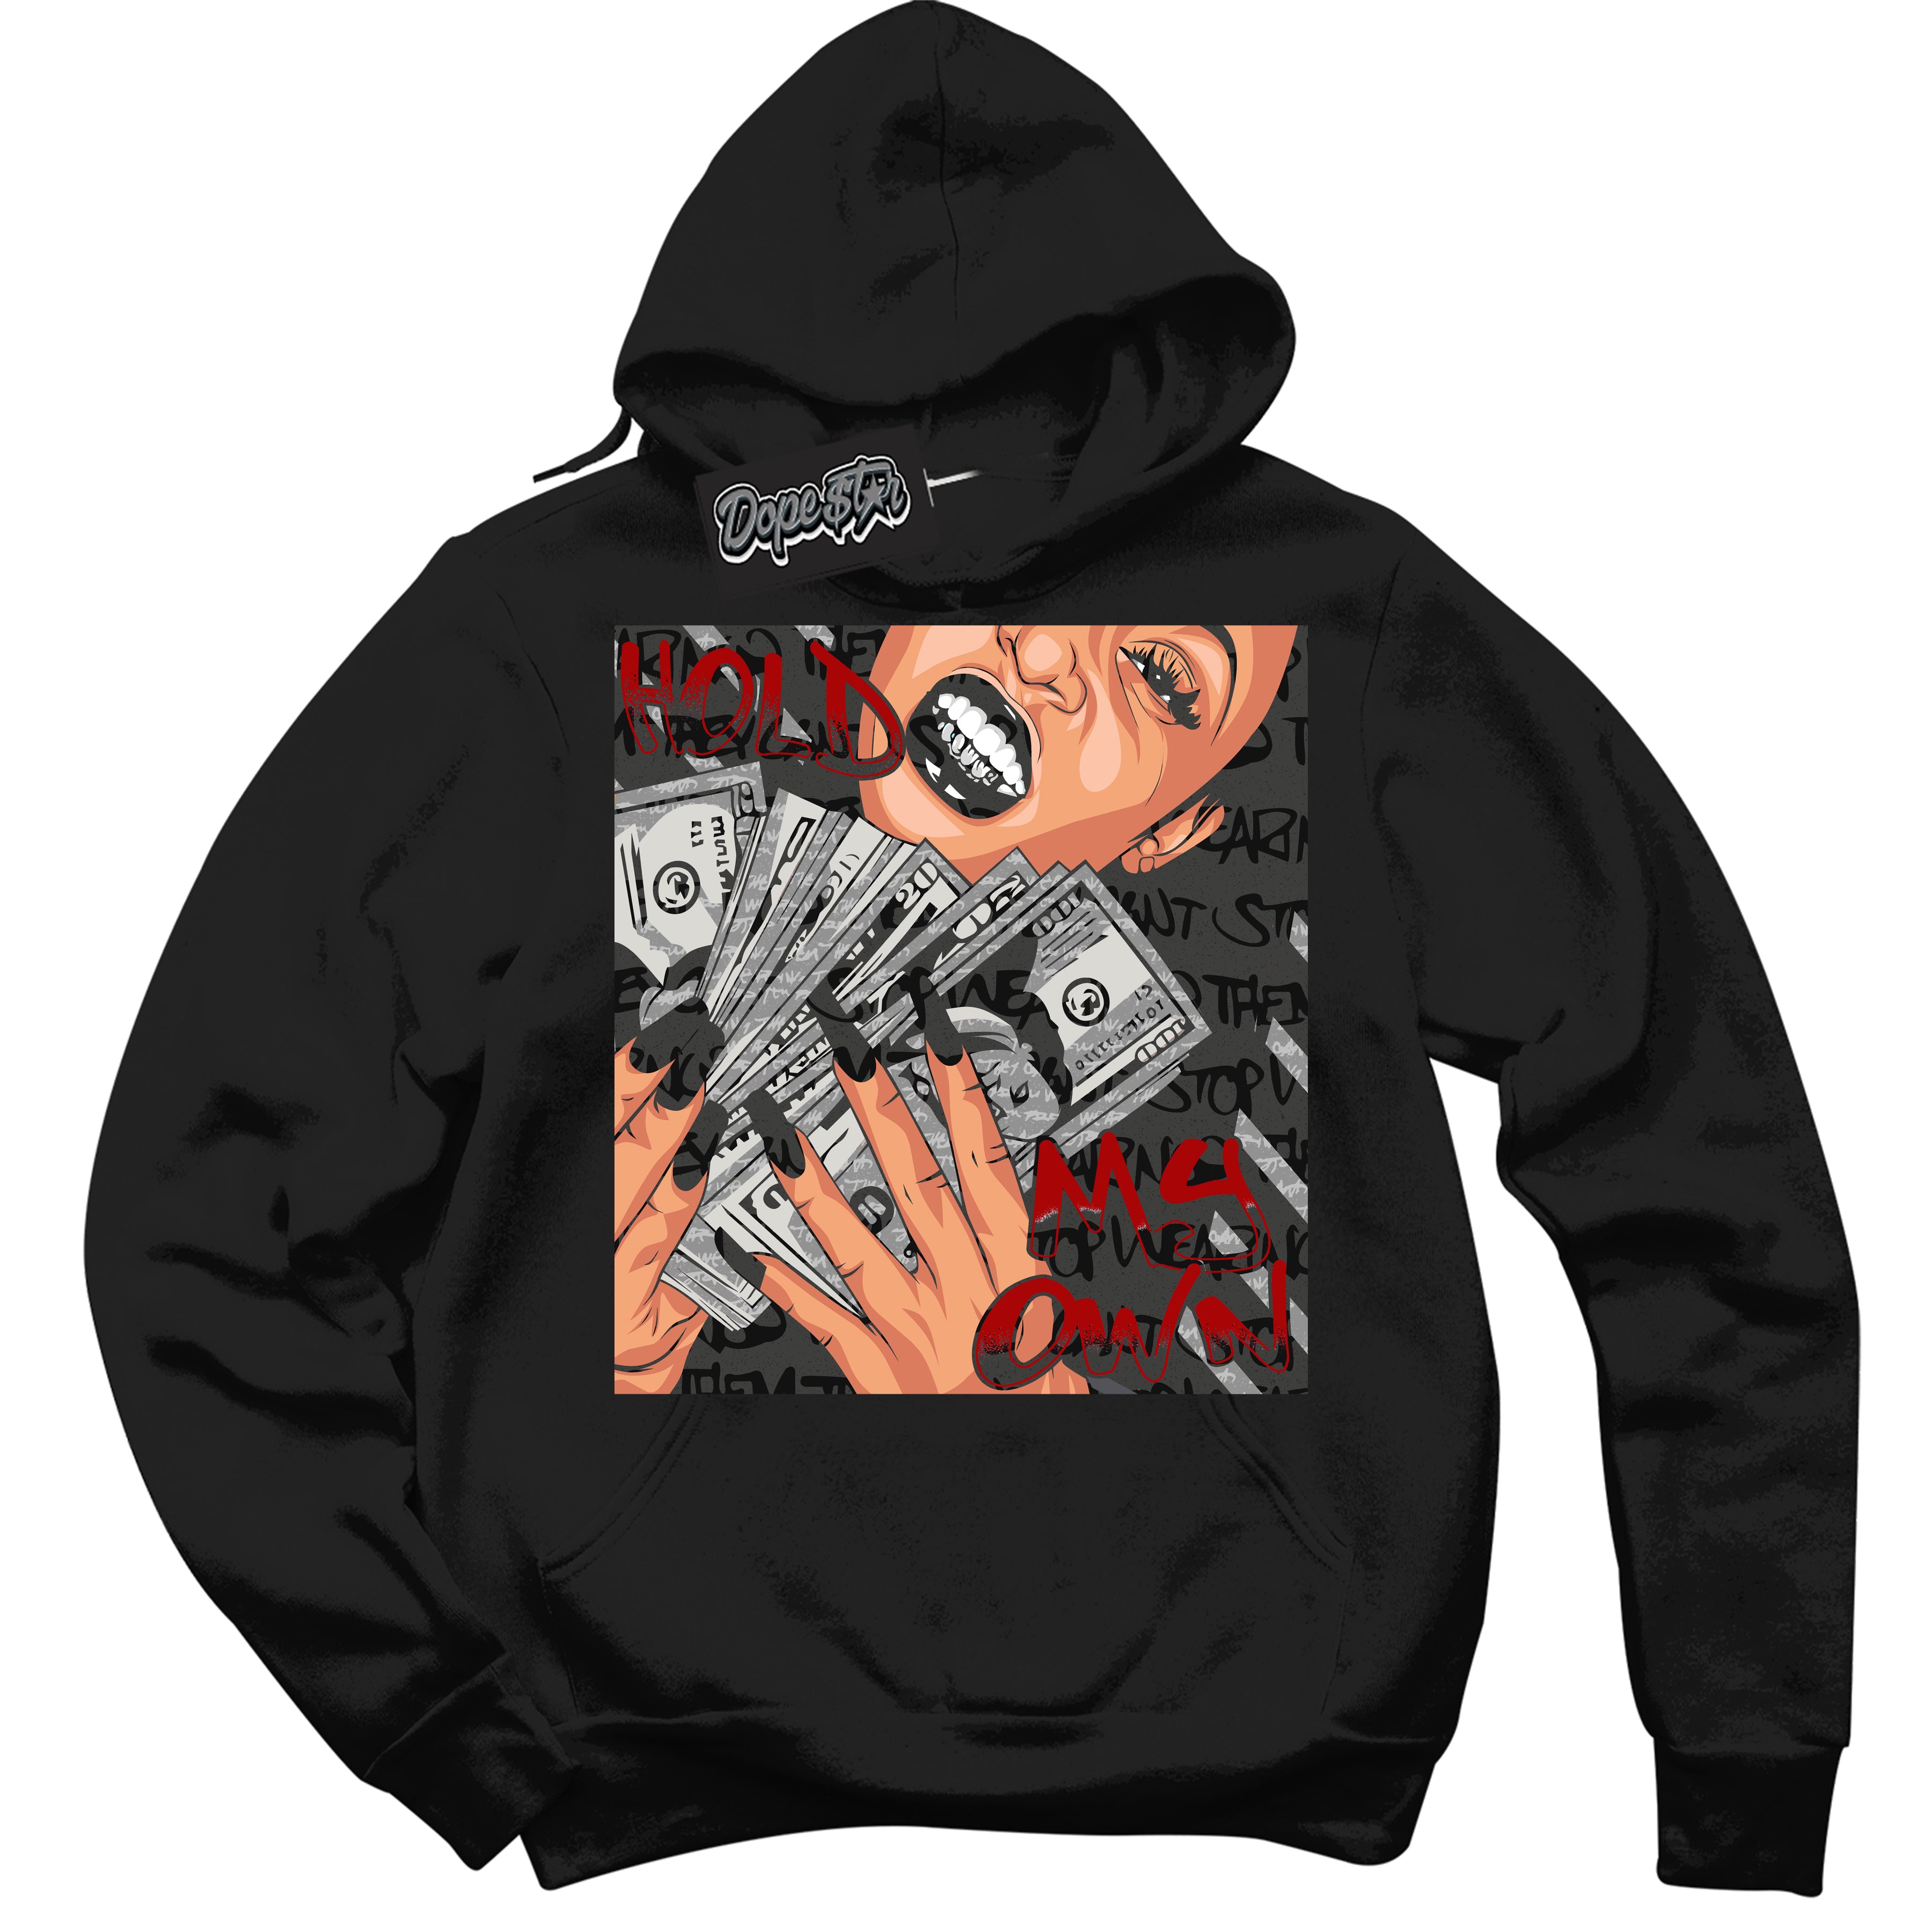 Cool Black Hoodie with “ Hold My Own ”  design that Perfectly Matches Rebellionaire 1s Sneakers.